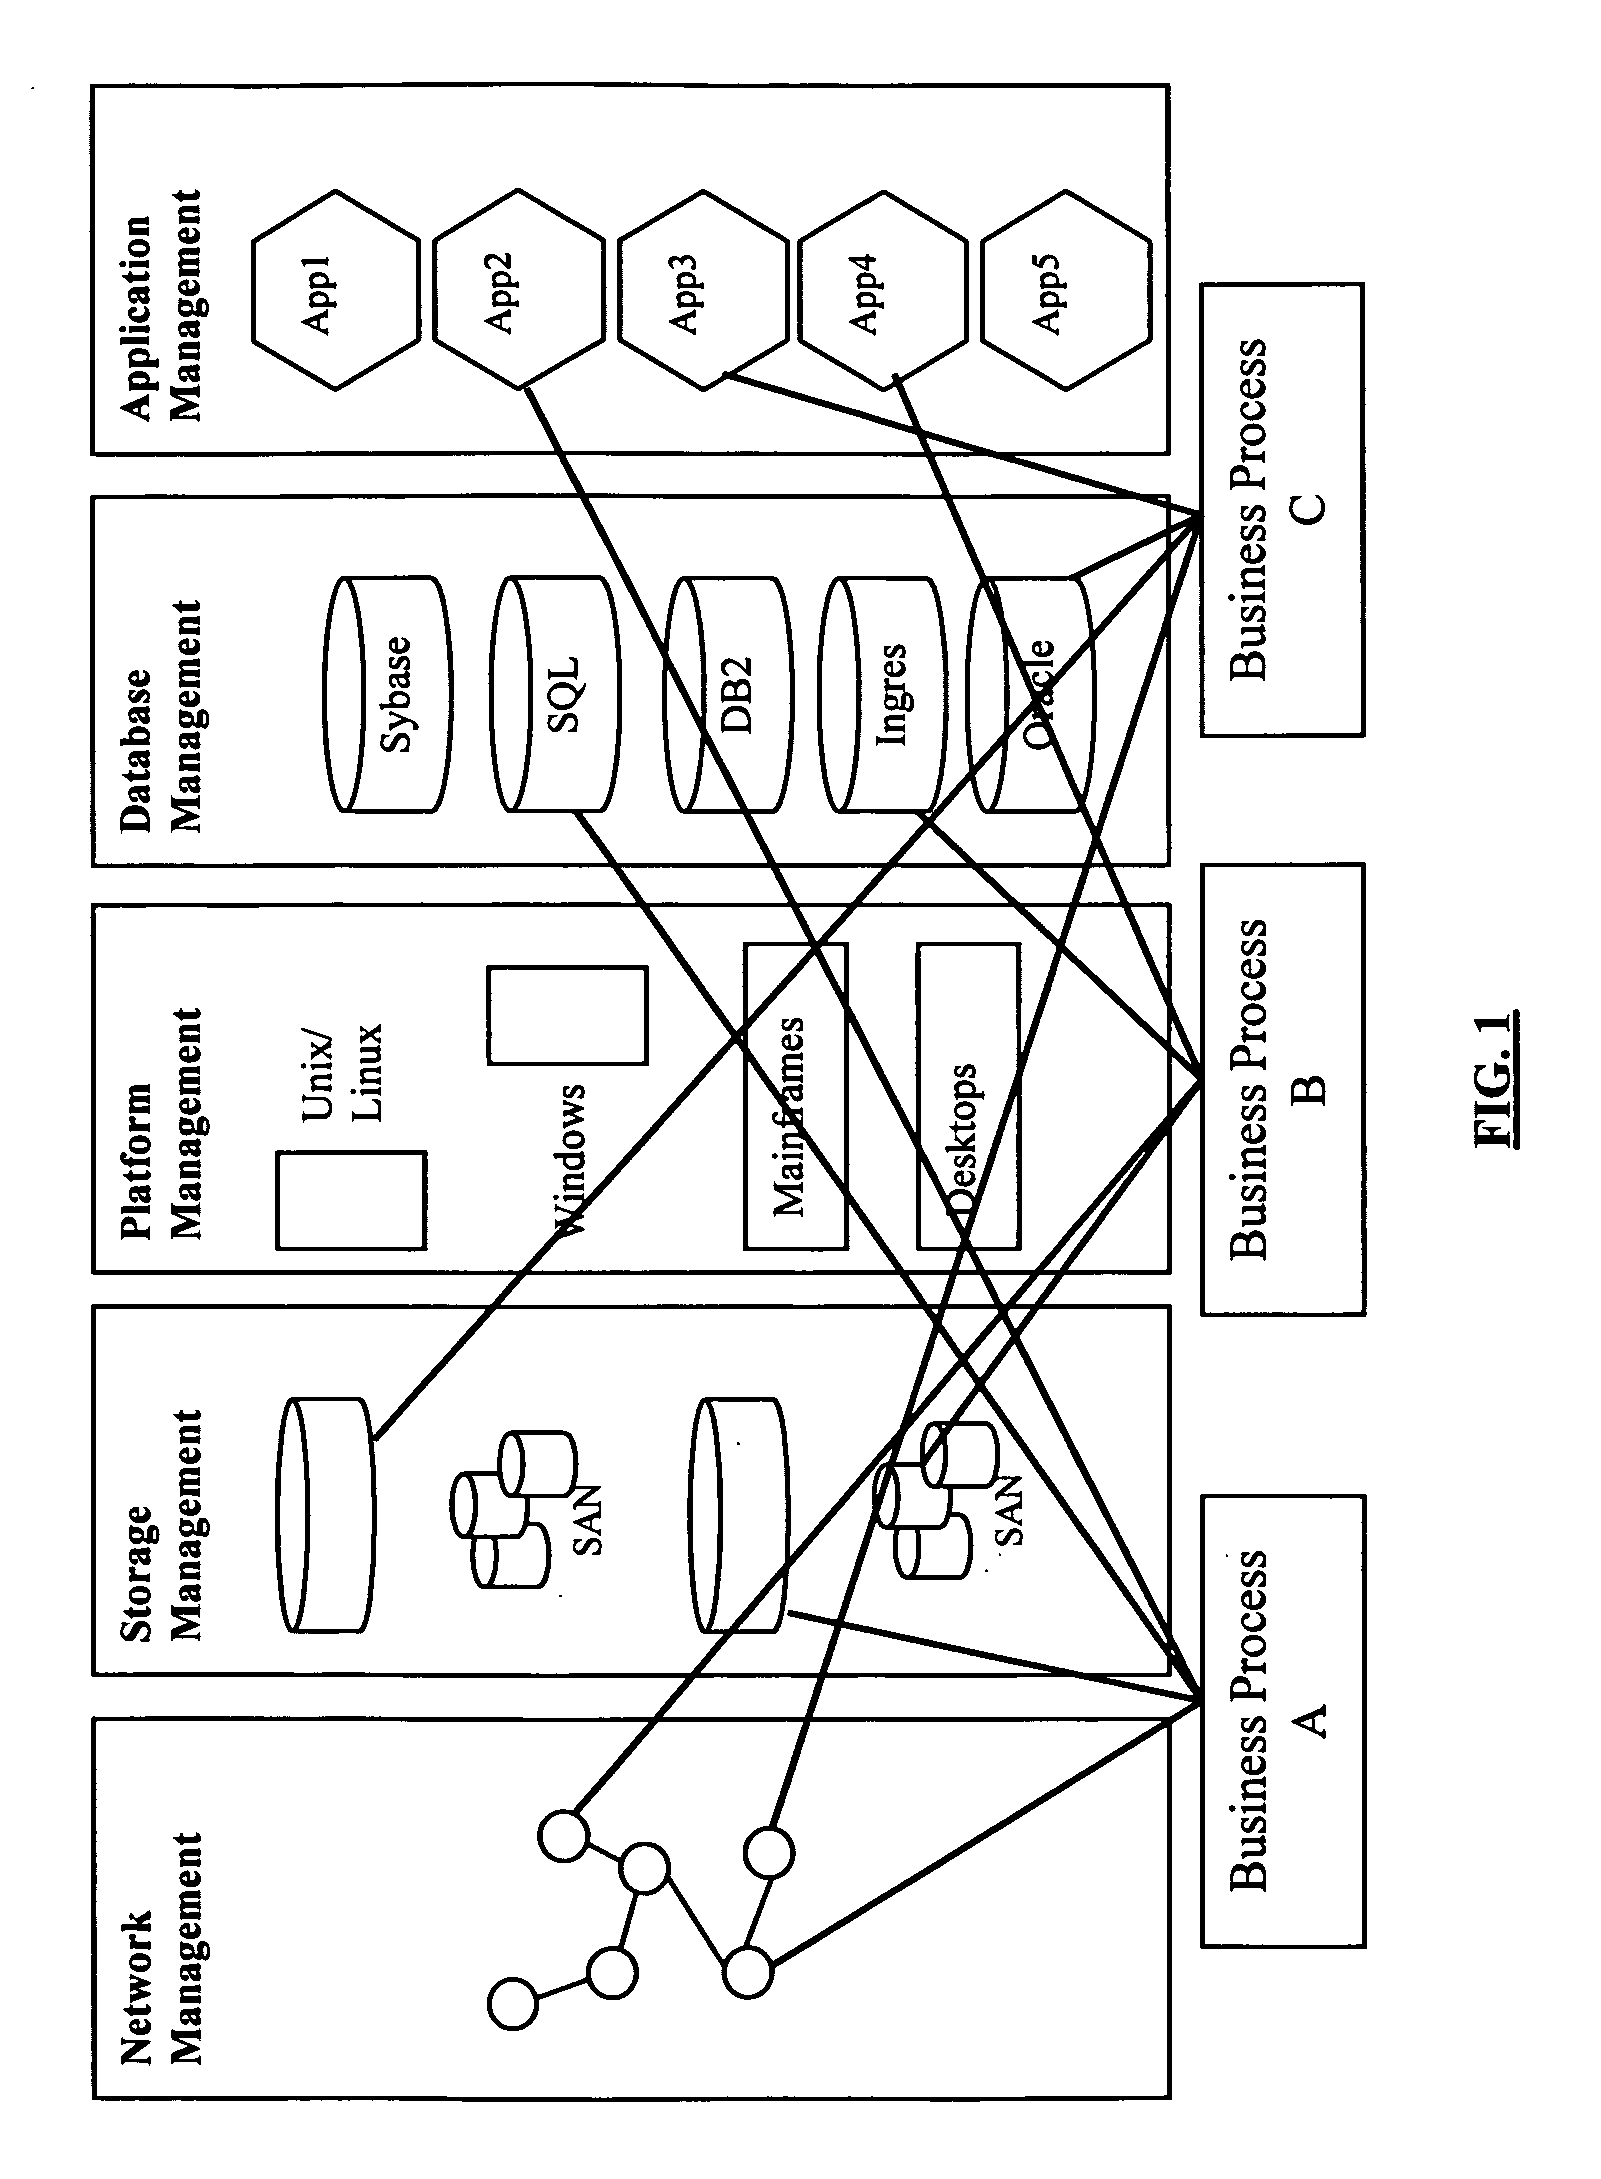 System and method for enhanced automation of information technology management